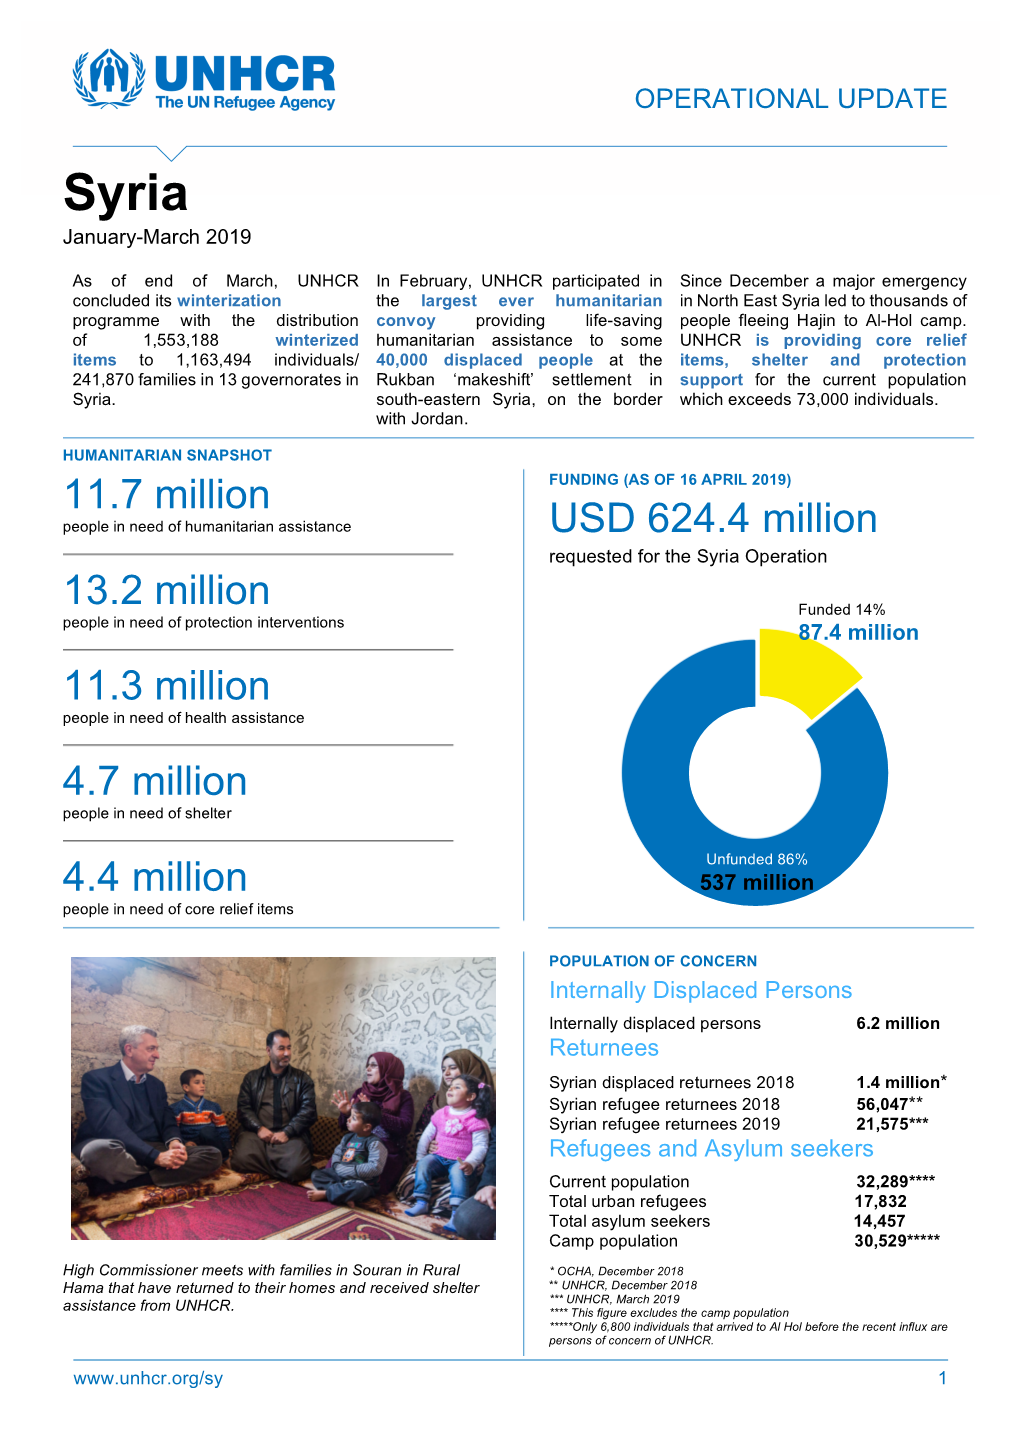 UNHCR's Operational Update: January-March 2019, English